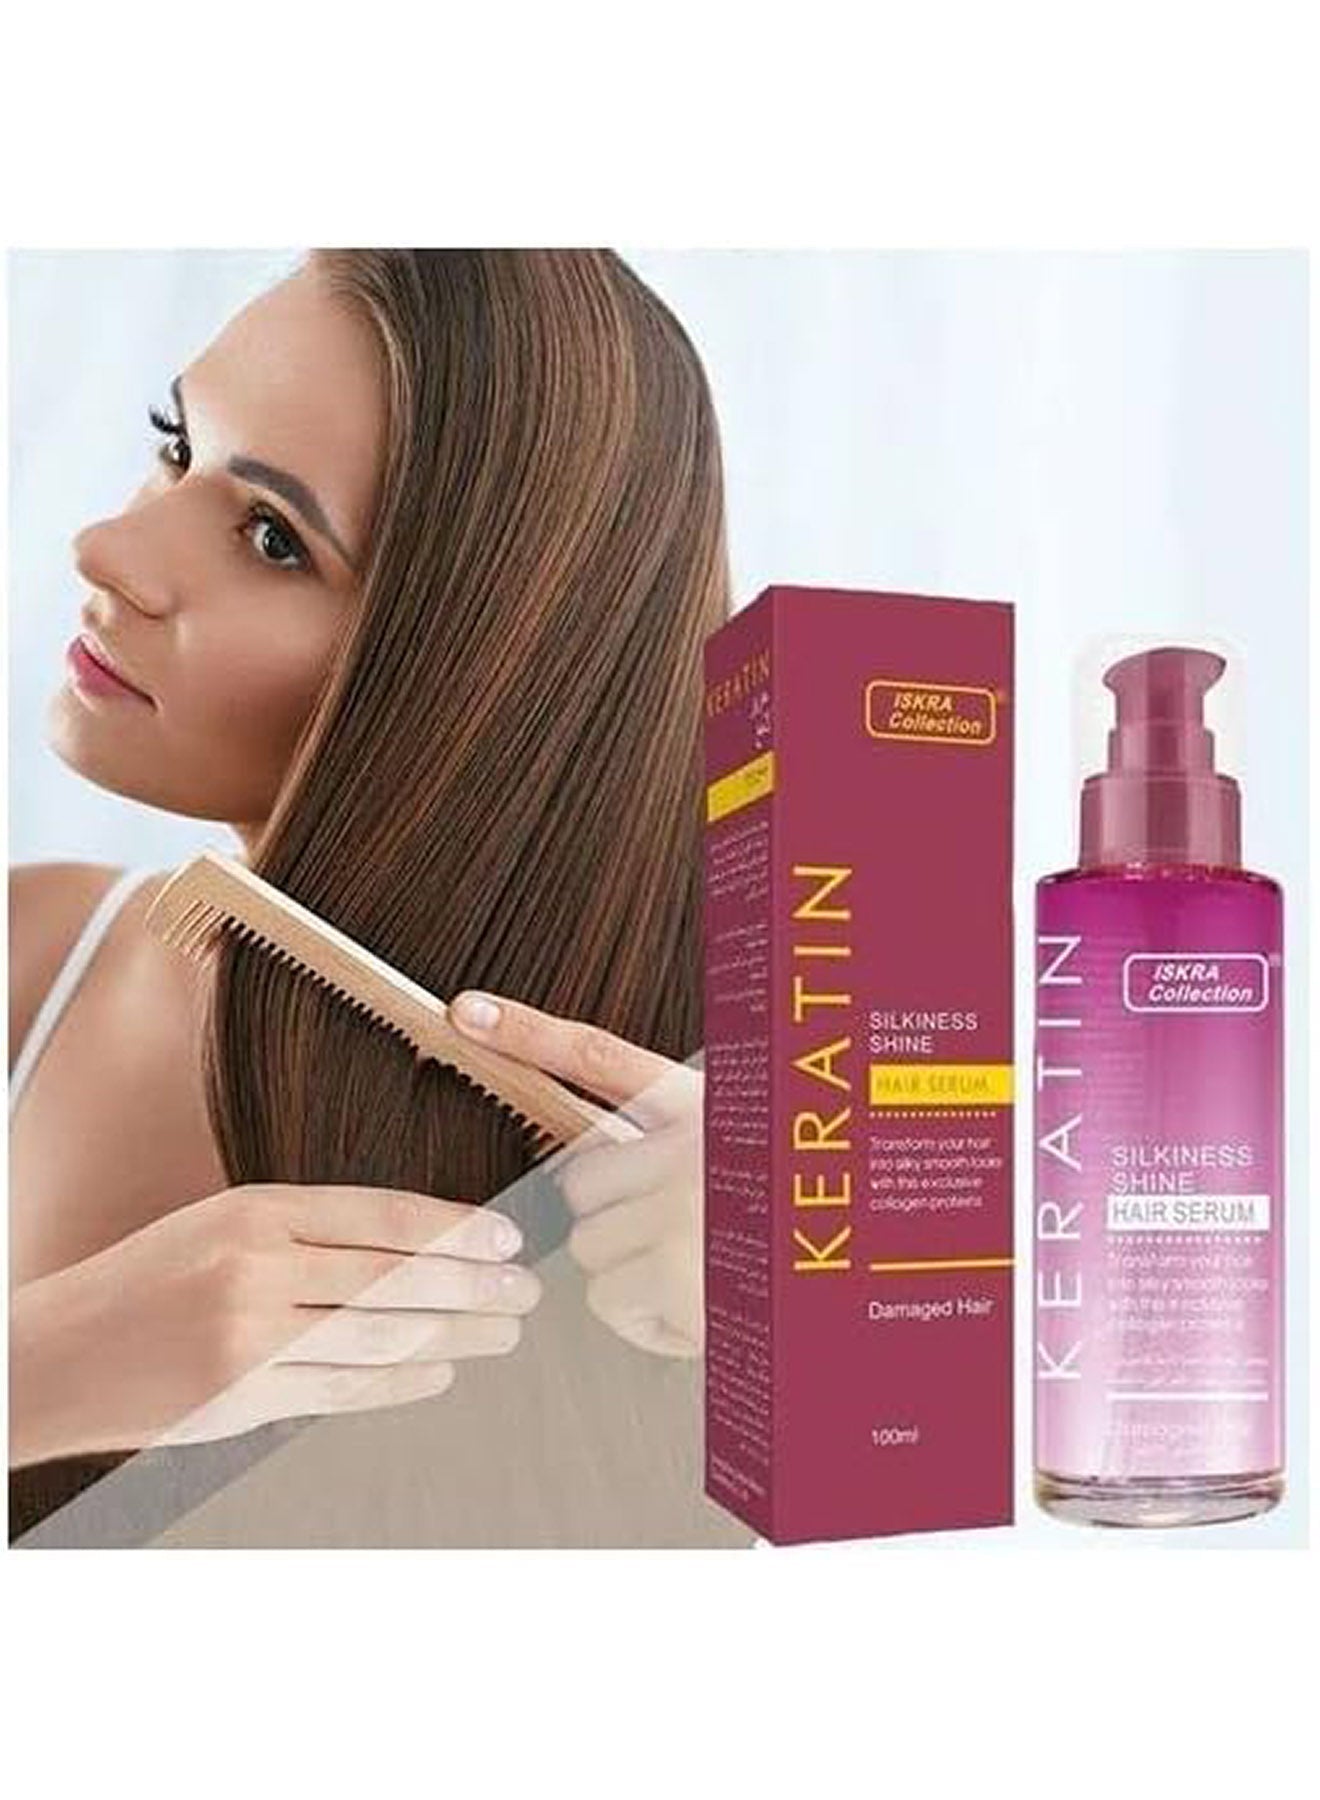 Skin Doctor Keratin Silky and Natural Shine Hair Serum 100 ml Value Pack of 12 